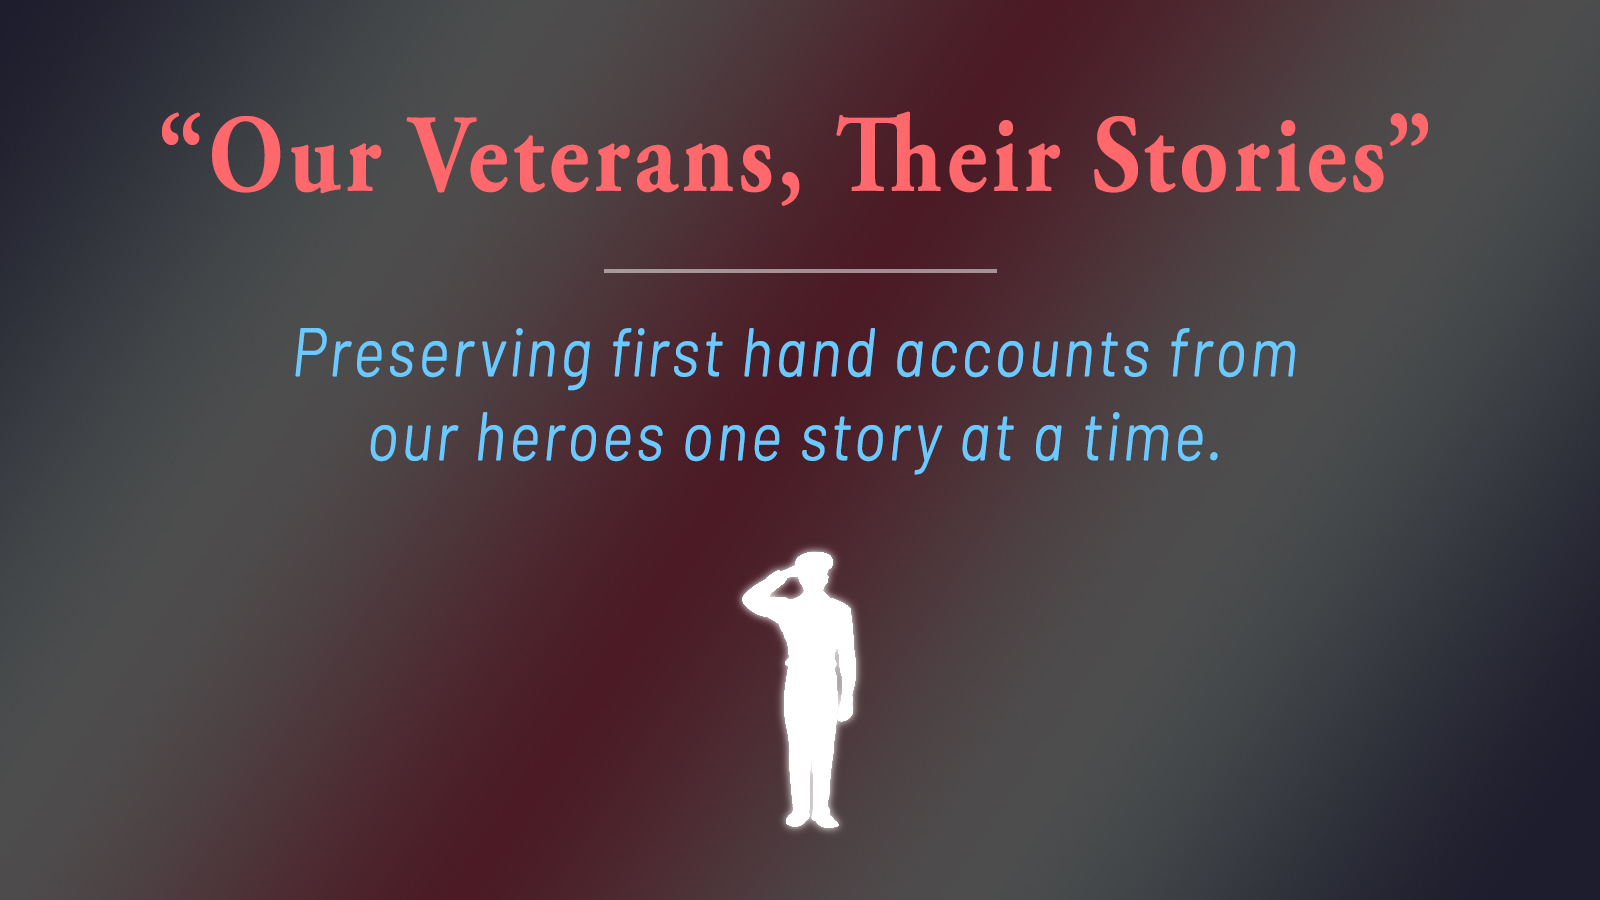 Our Veterans, Their Stories: Preserving first-hand accounts from our heroes one story at a time.